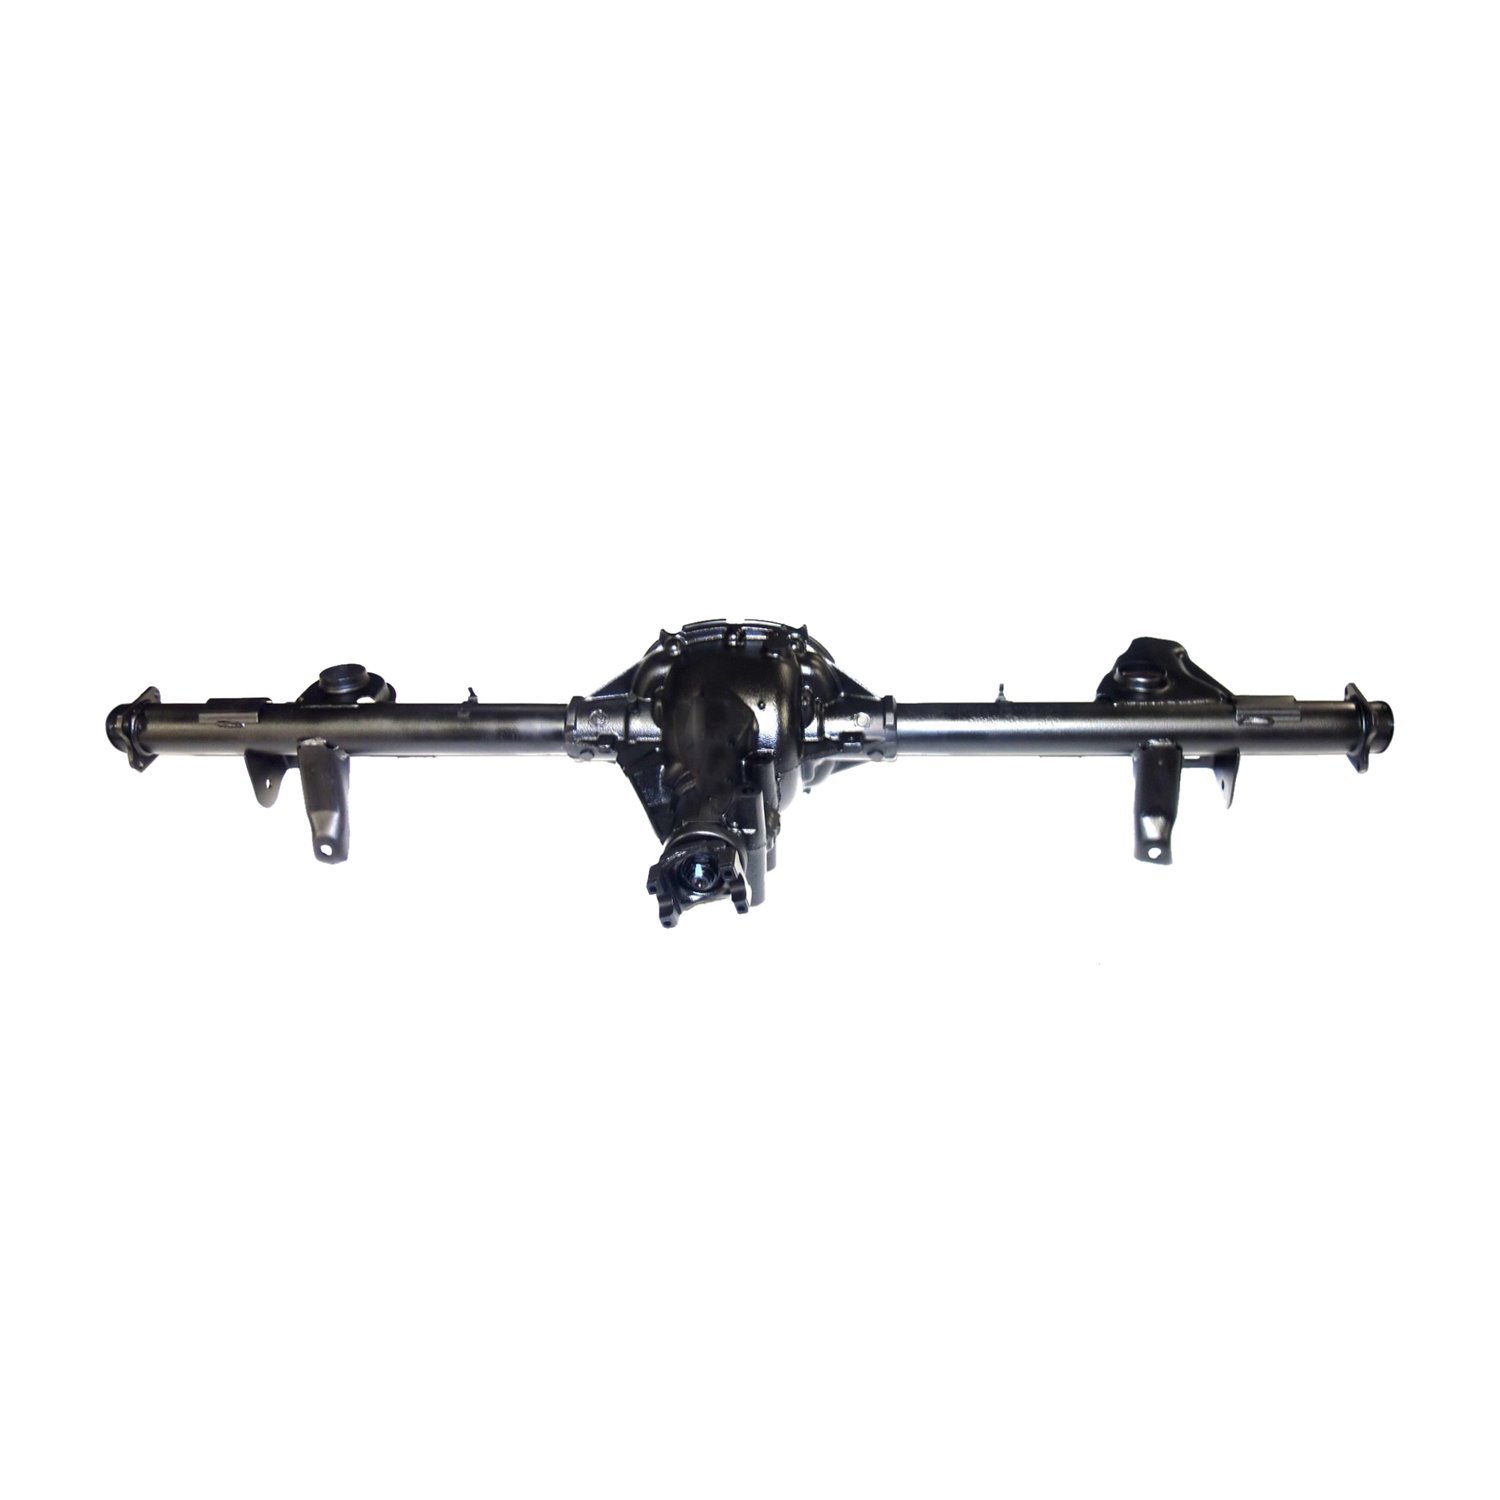 Remanufactured Axle Assy for GM 7.5" 95-97 Chevy S10 Blazer & S15 Jimmy, 3.42 , 4x4